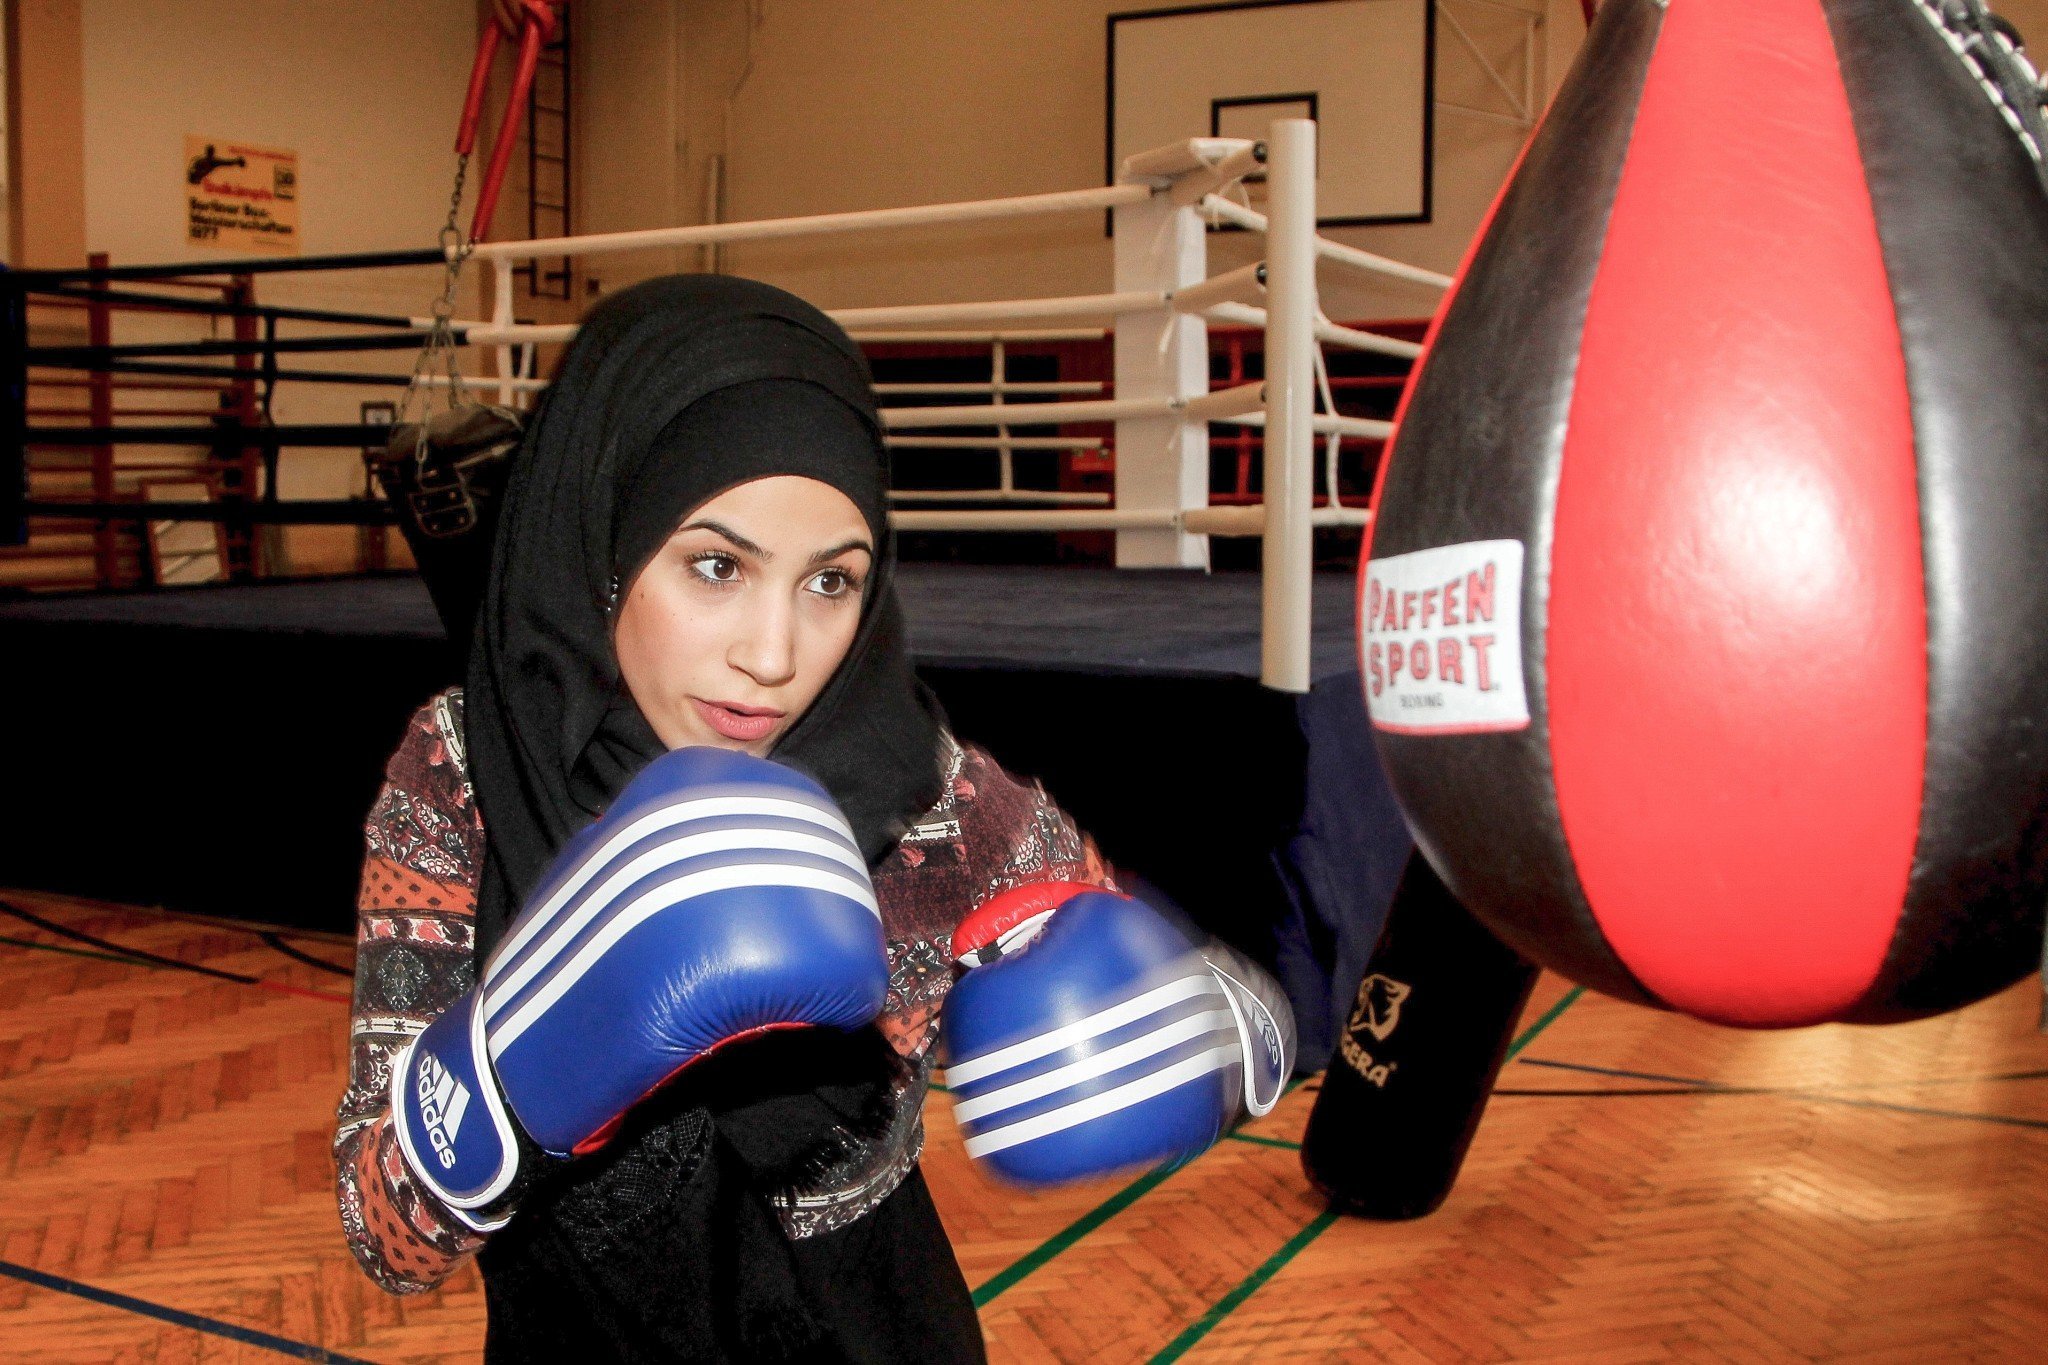 Amateur Female Boxers Can Now Wear Hijabs And Head Coverings HuffPost Women image